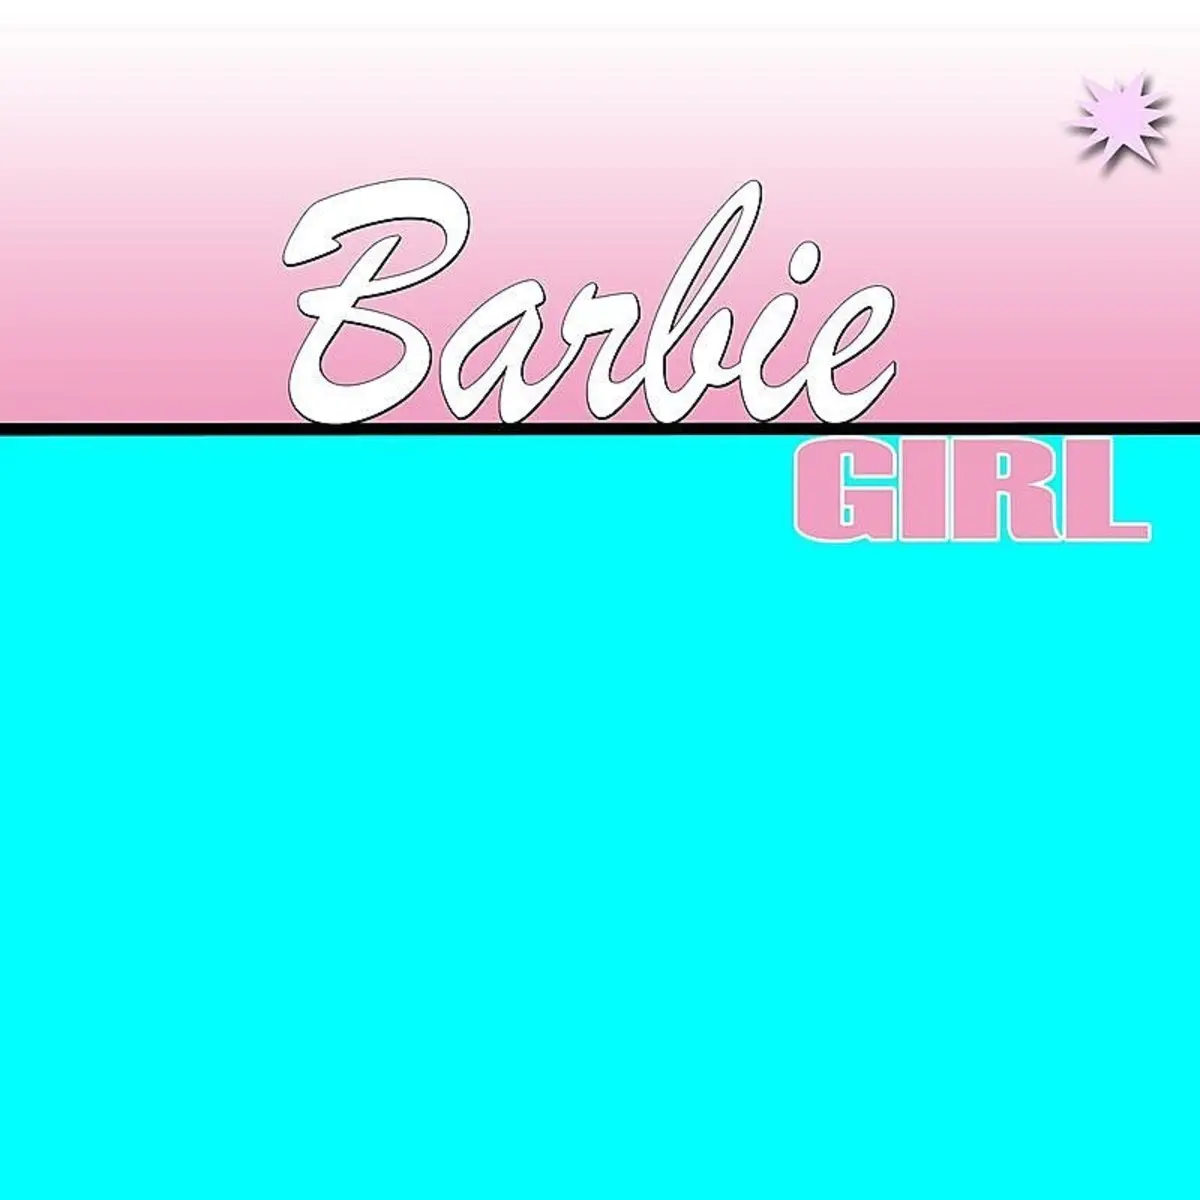 barbie girl song in english